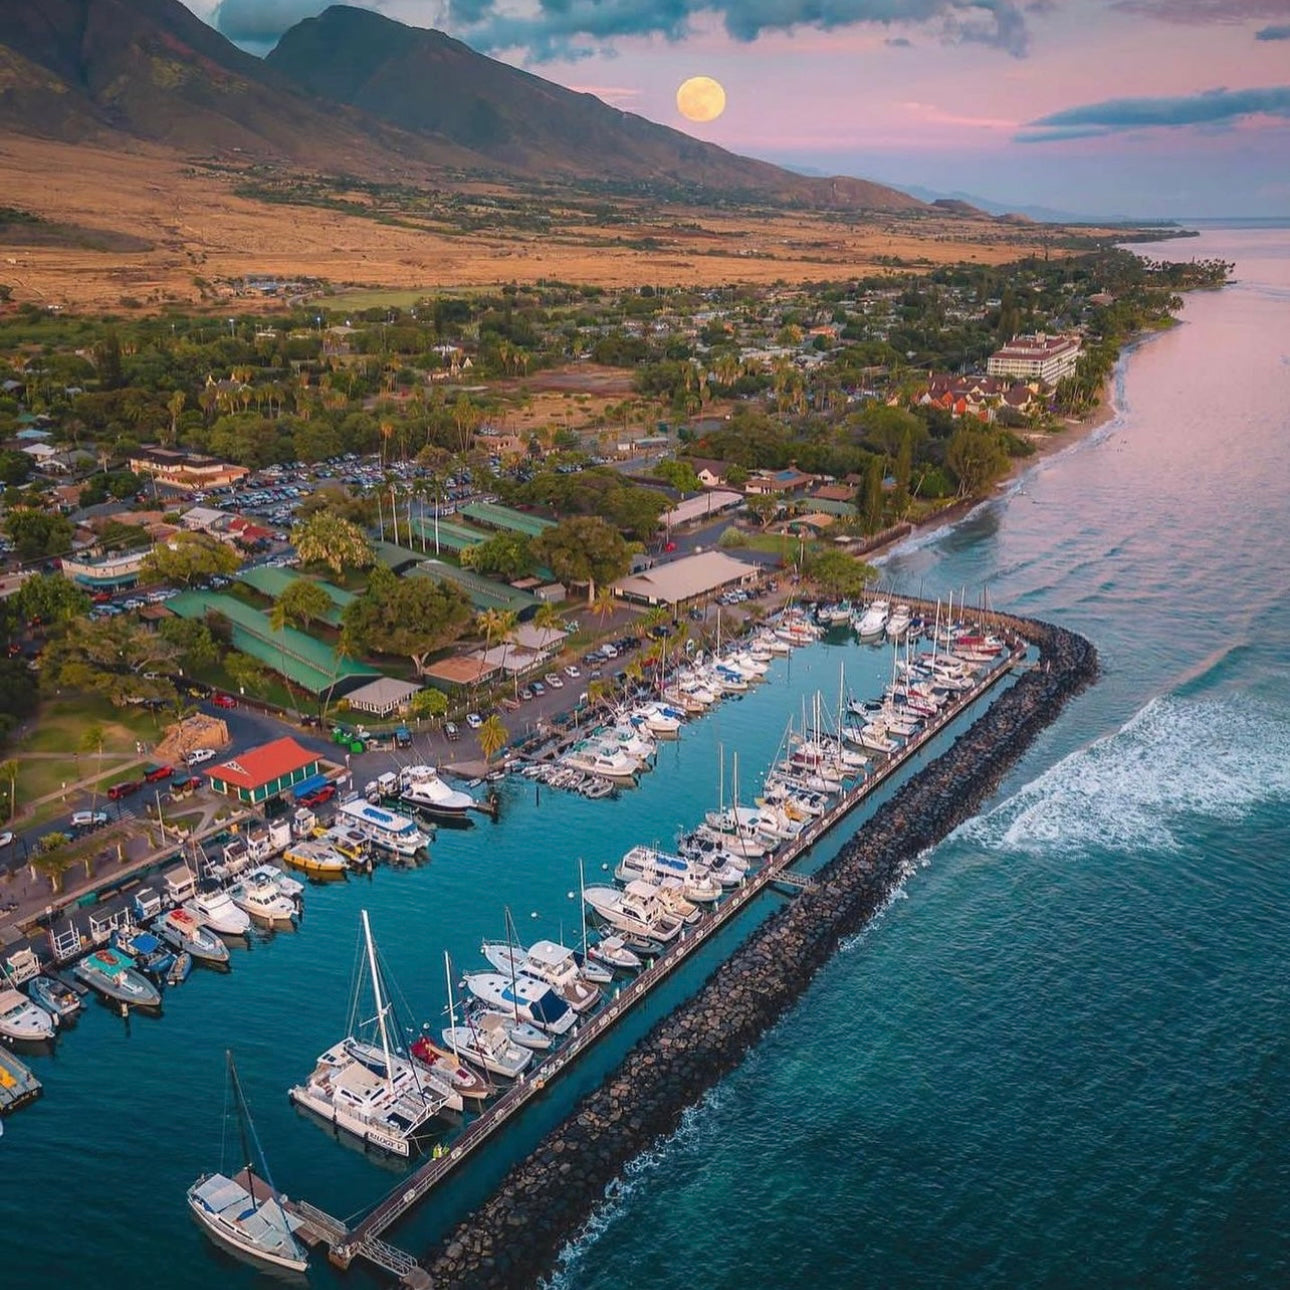 Image of Lahaina boat harbor, before the fire